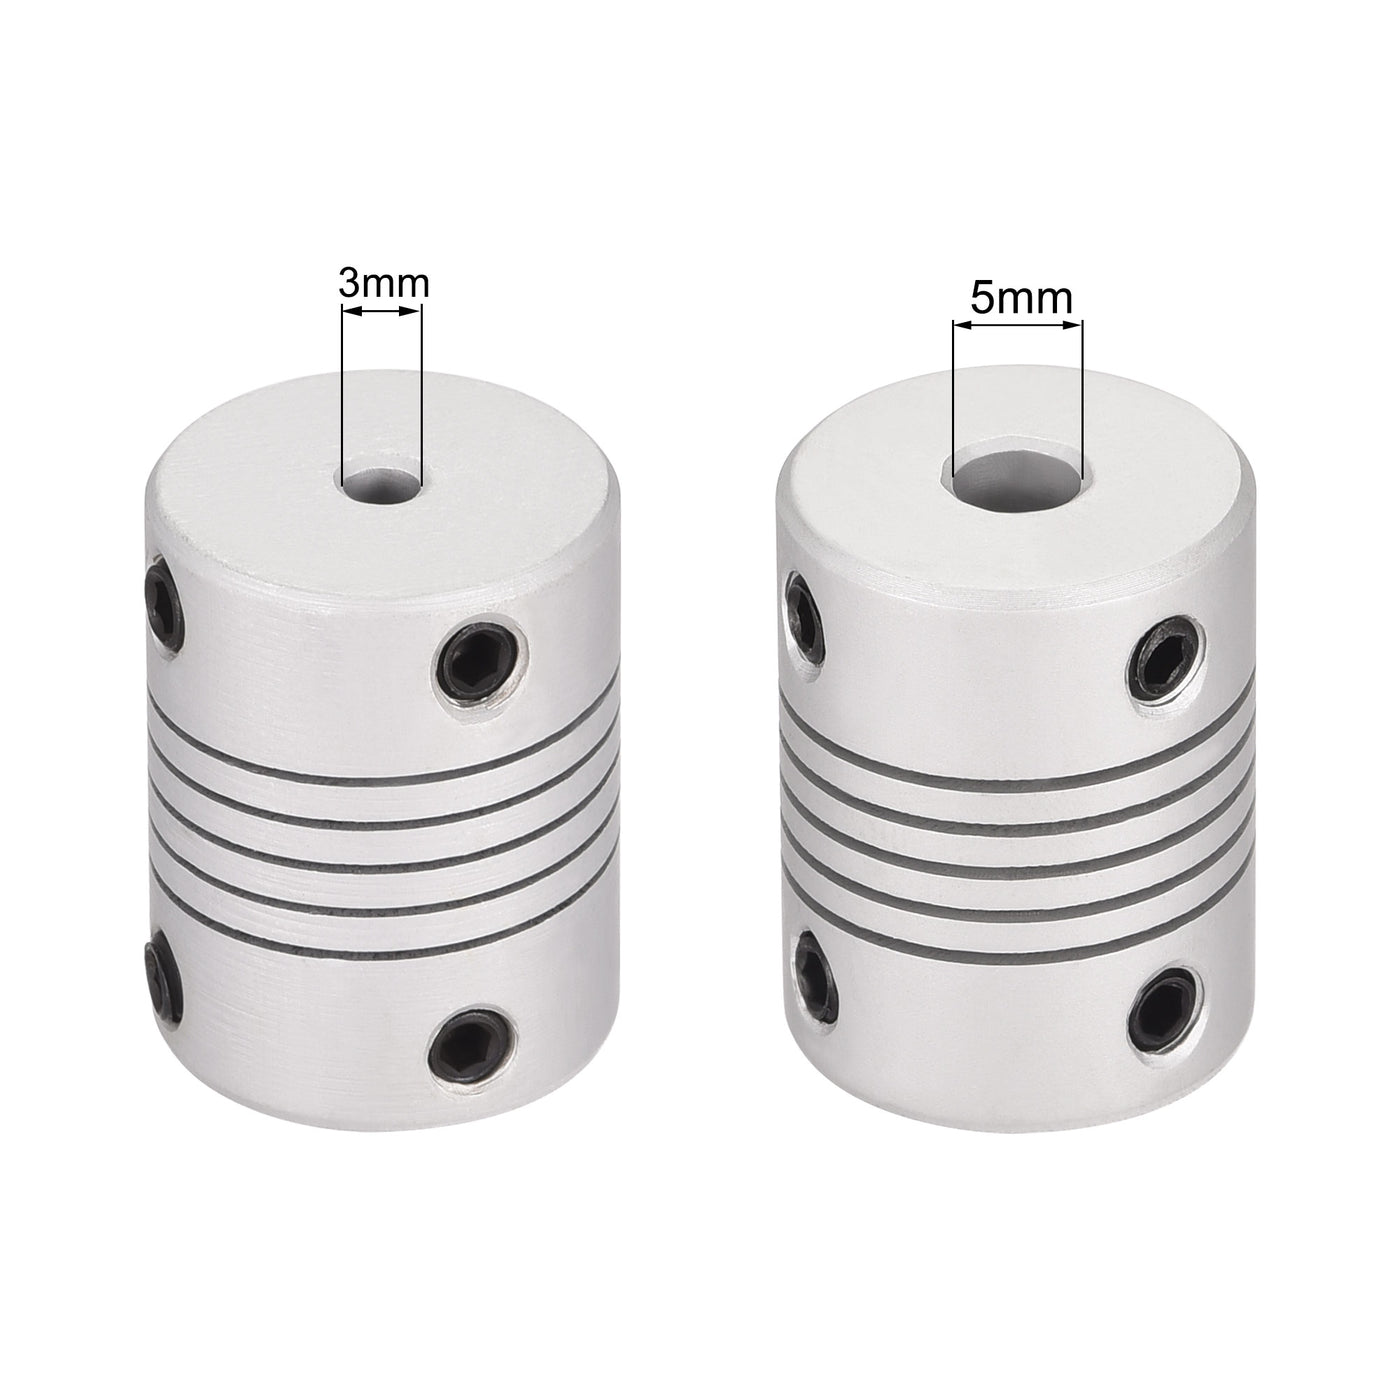 uxcell Uxcell 3mm to 5mm Aluminum Alloy Shaft Coupling Flexible Coupler L25xD19 Silver,2pcs